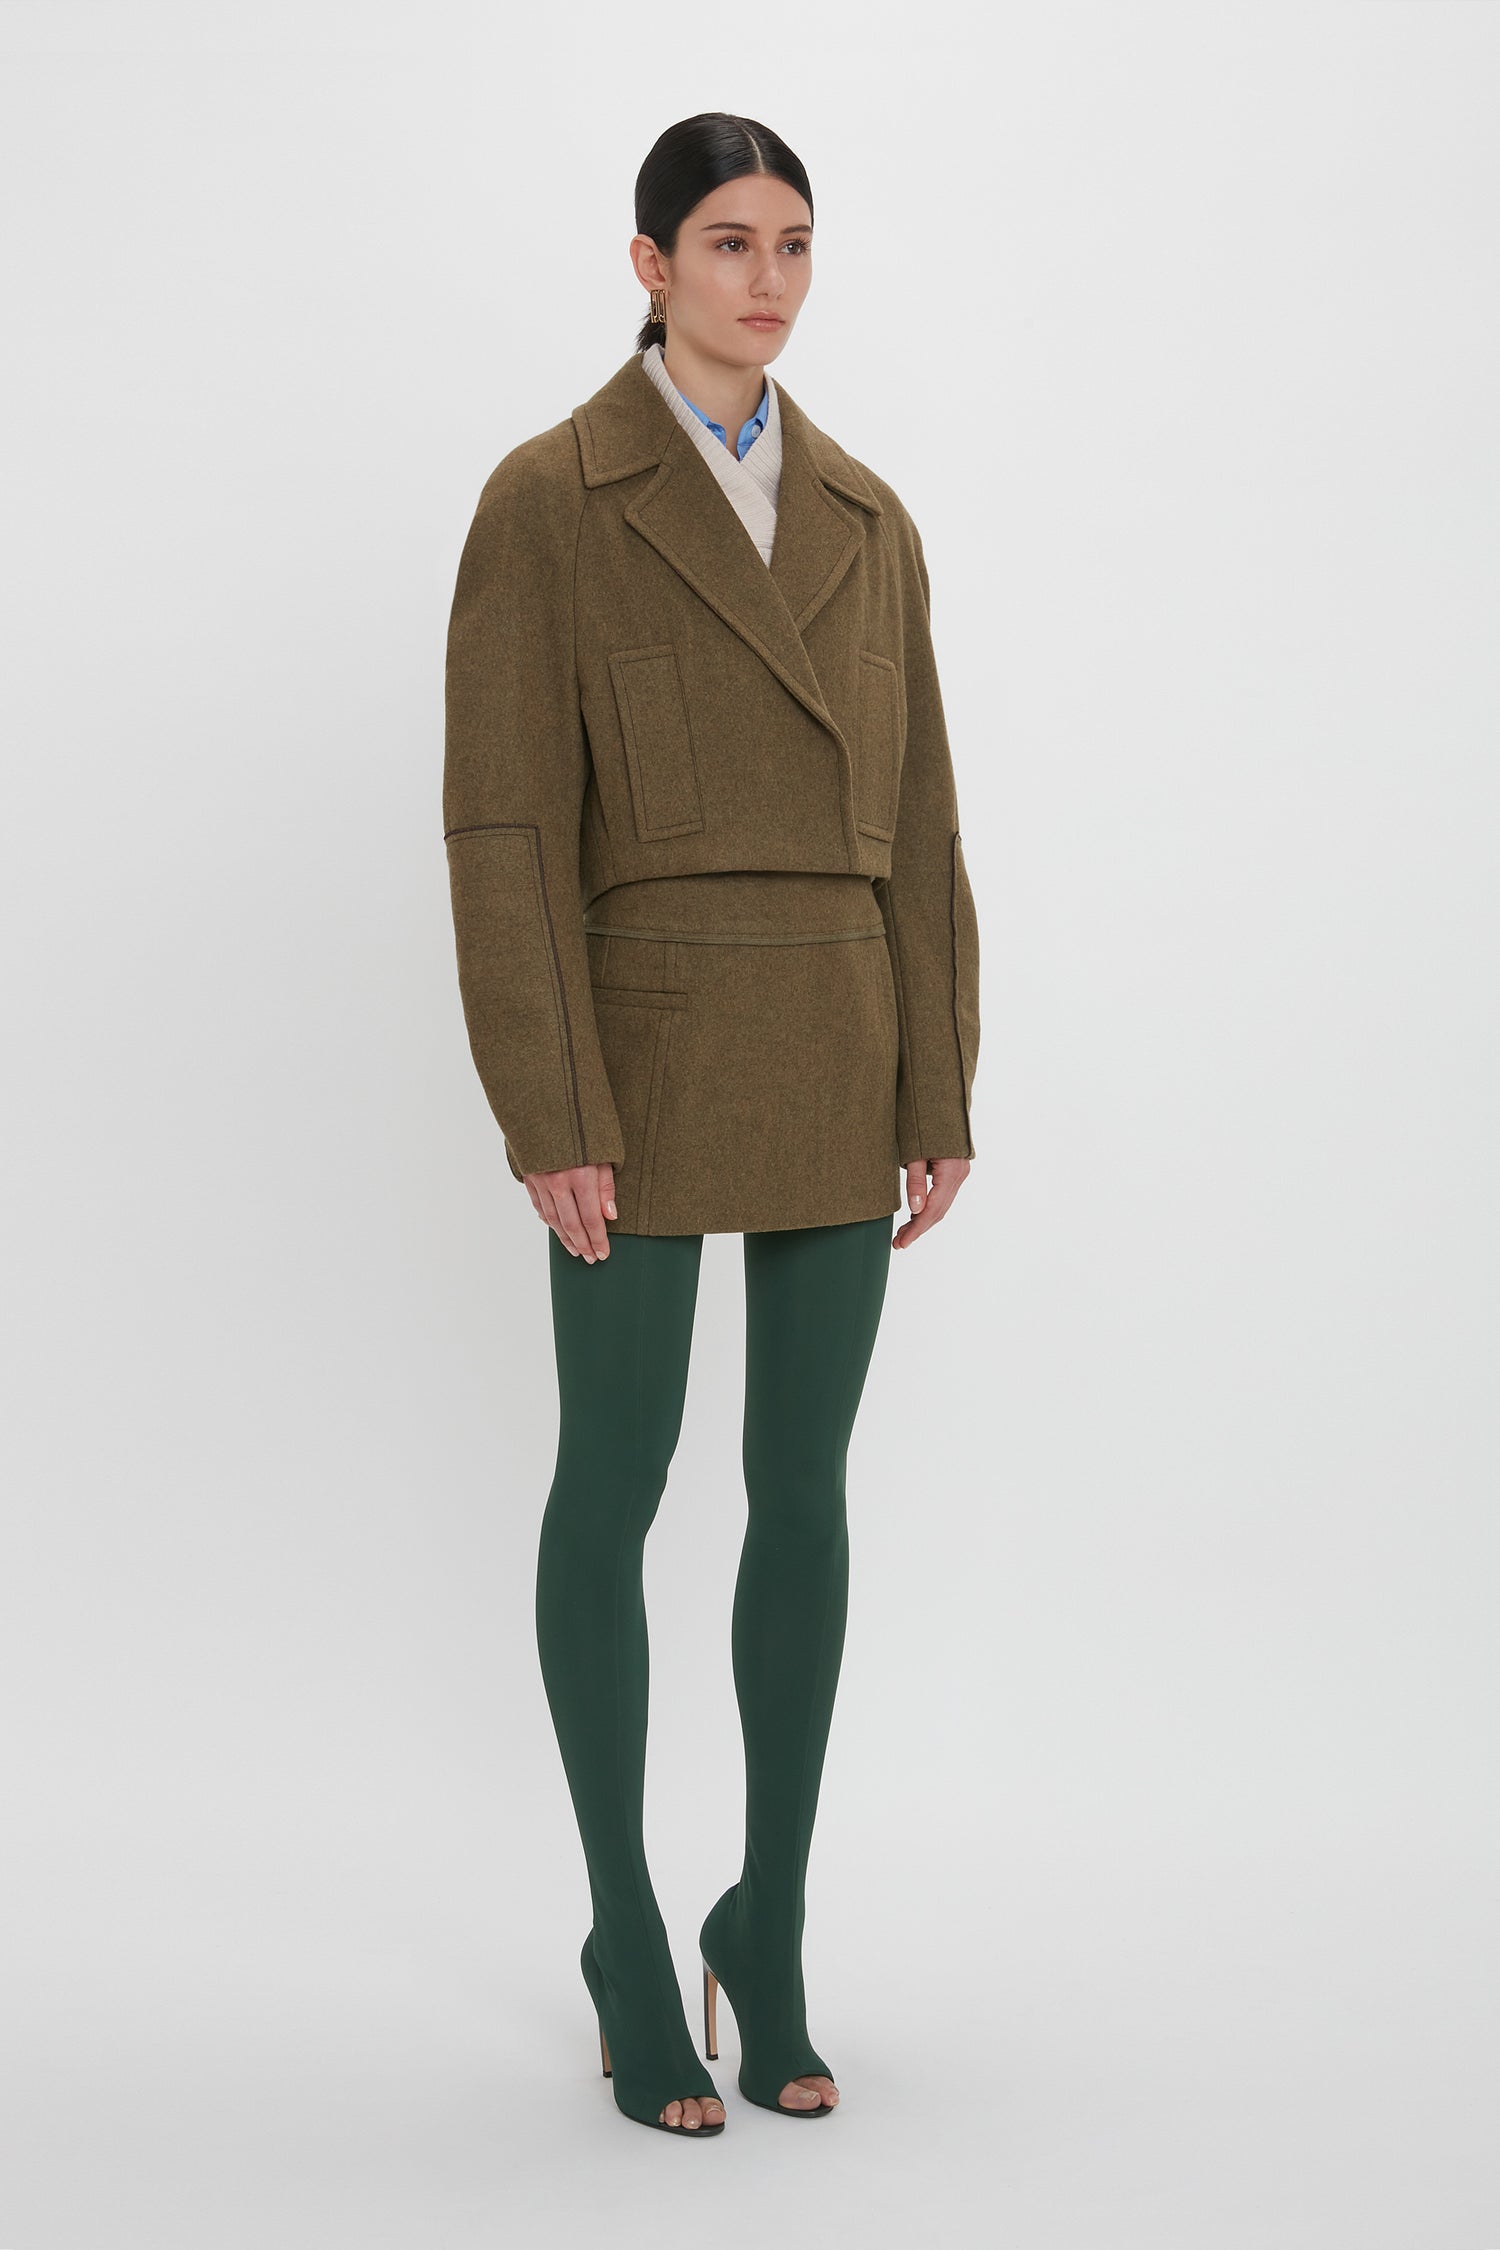 A person is wearing a Cropped Pea Coat In Khaki by Victoria Beckham, a matching mini skirt, and green tights made of Merino Wool. They complete their look with open-toe high heels and are standing against a plain white background.